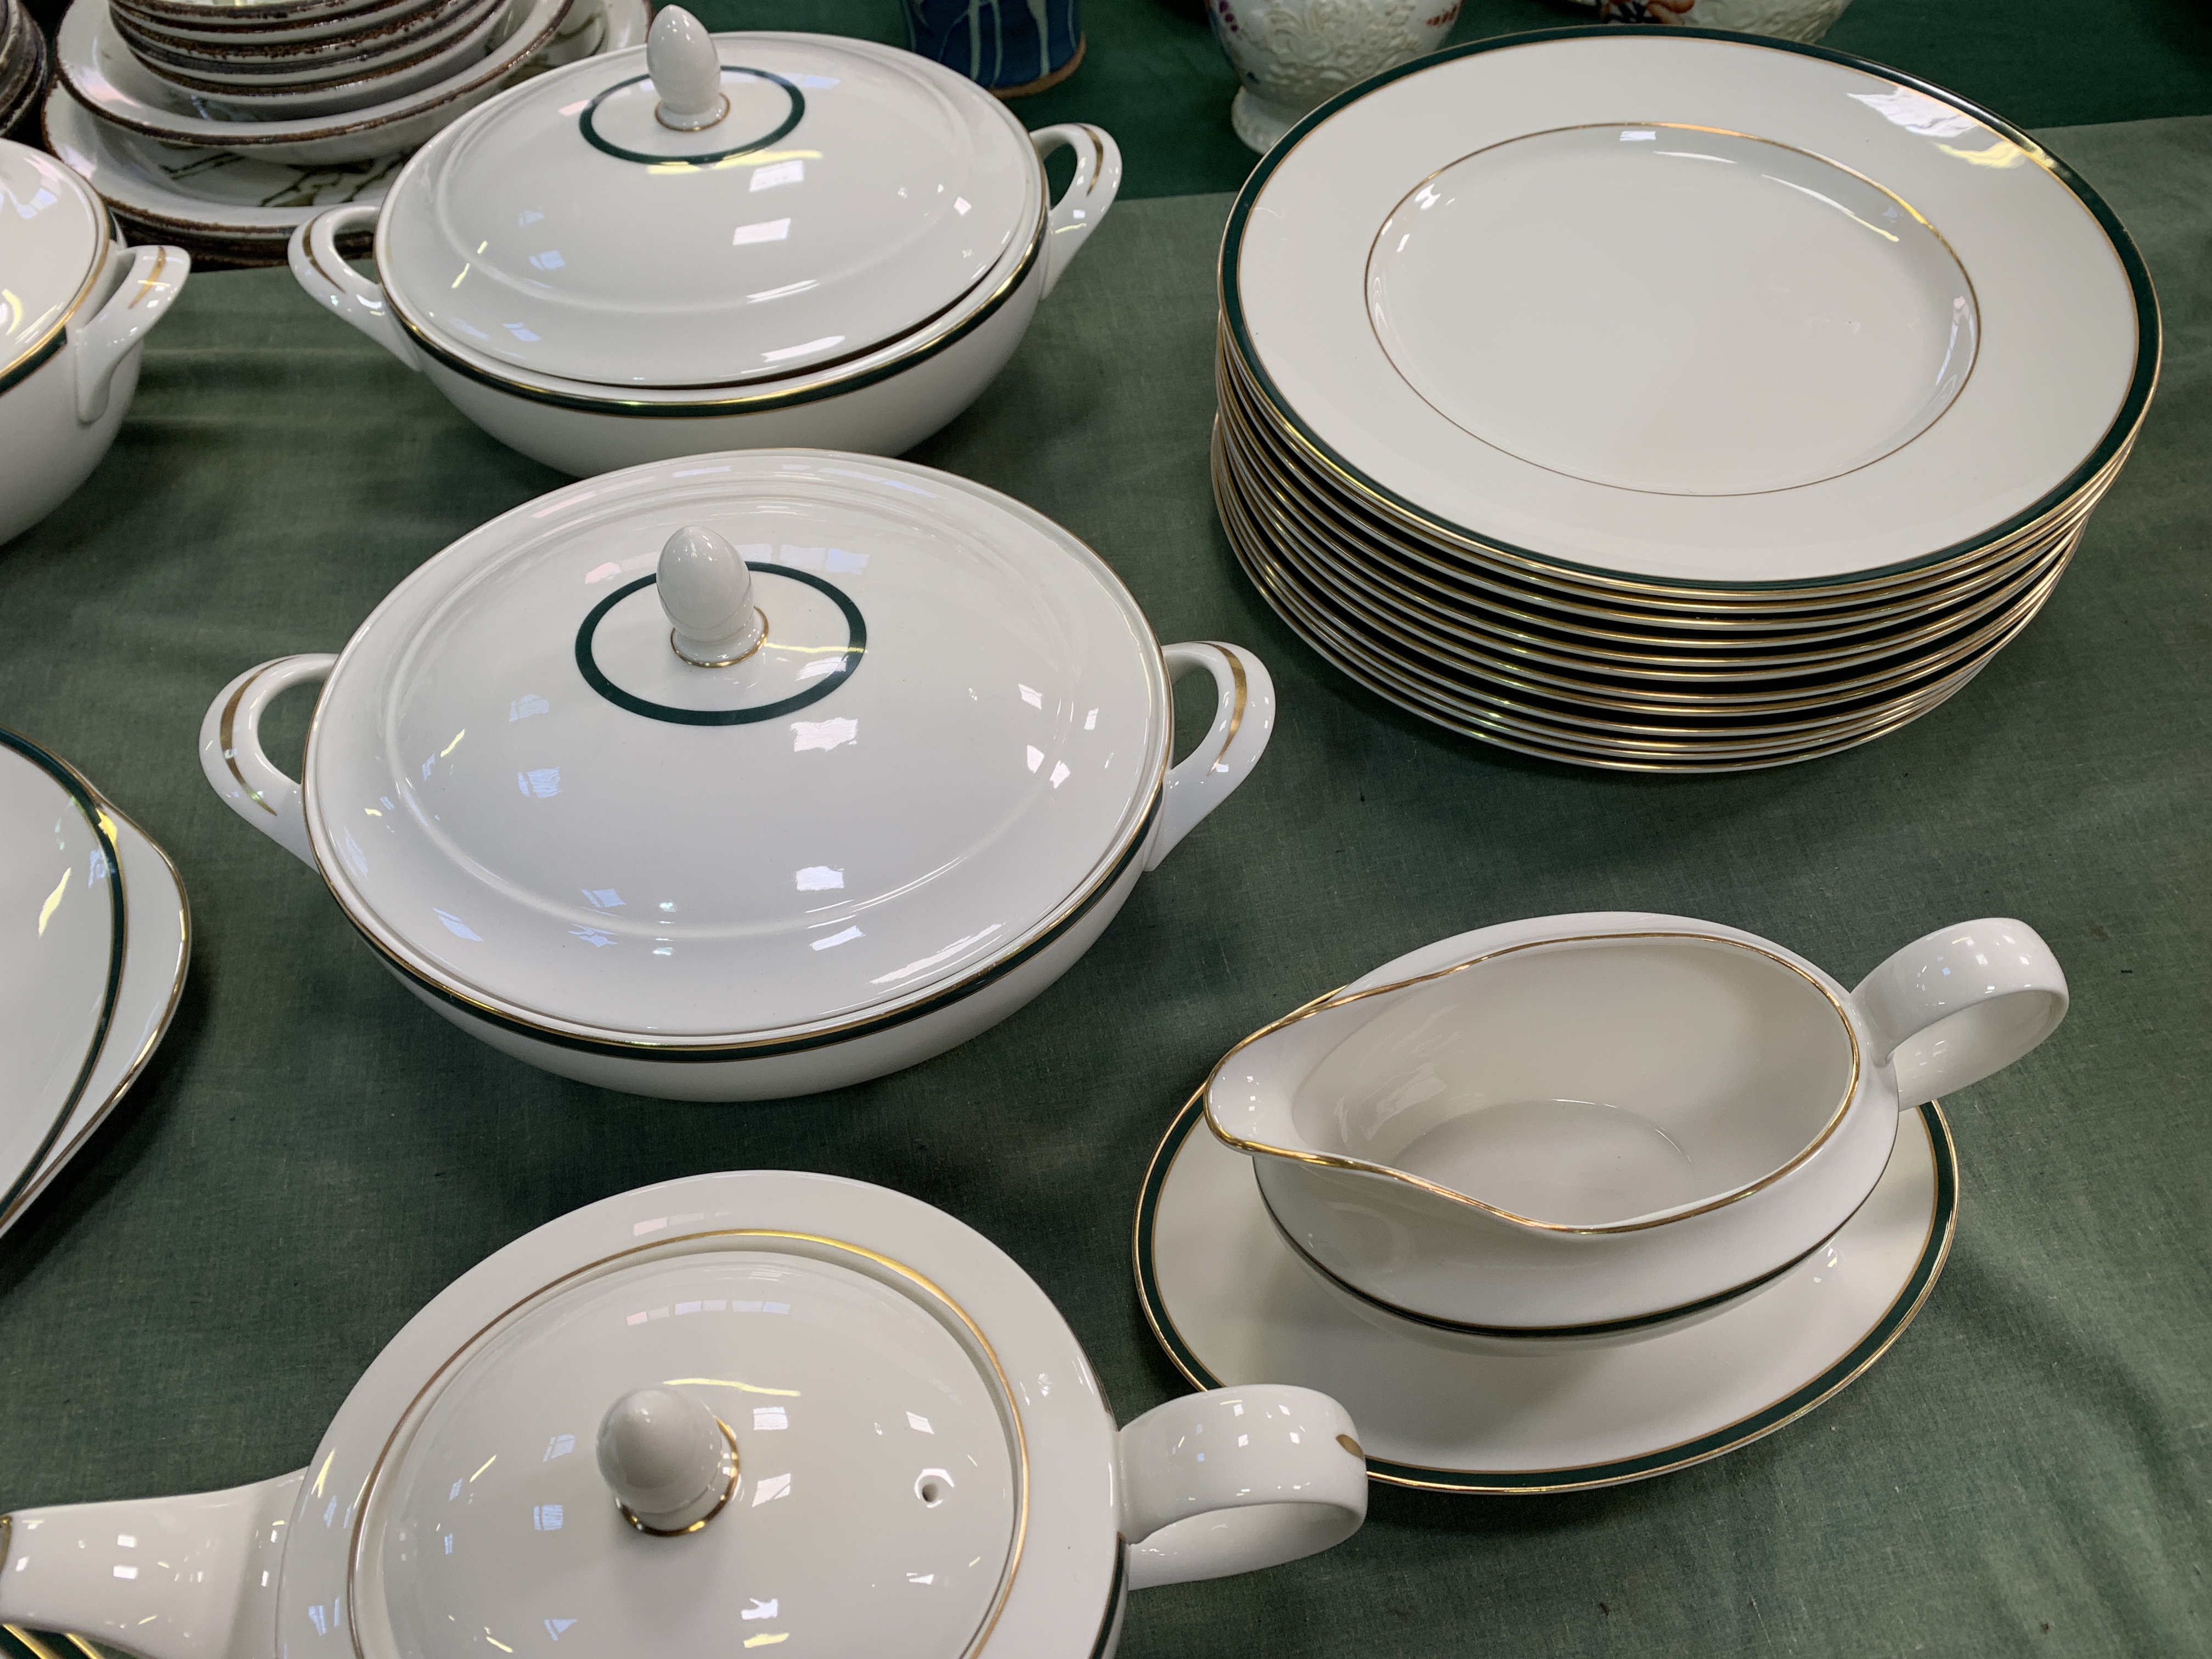 Royal Doulton 'Oxford Green' ten place setting dinner service - Image 2 of 6